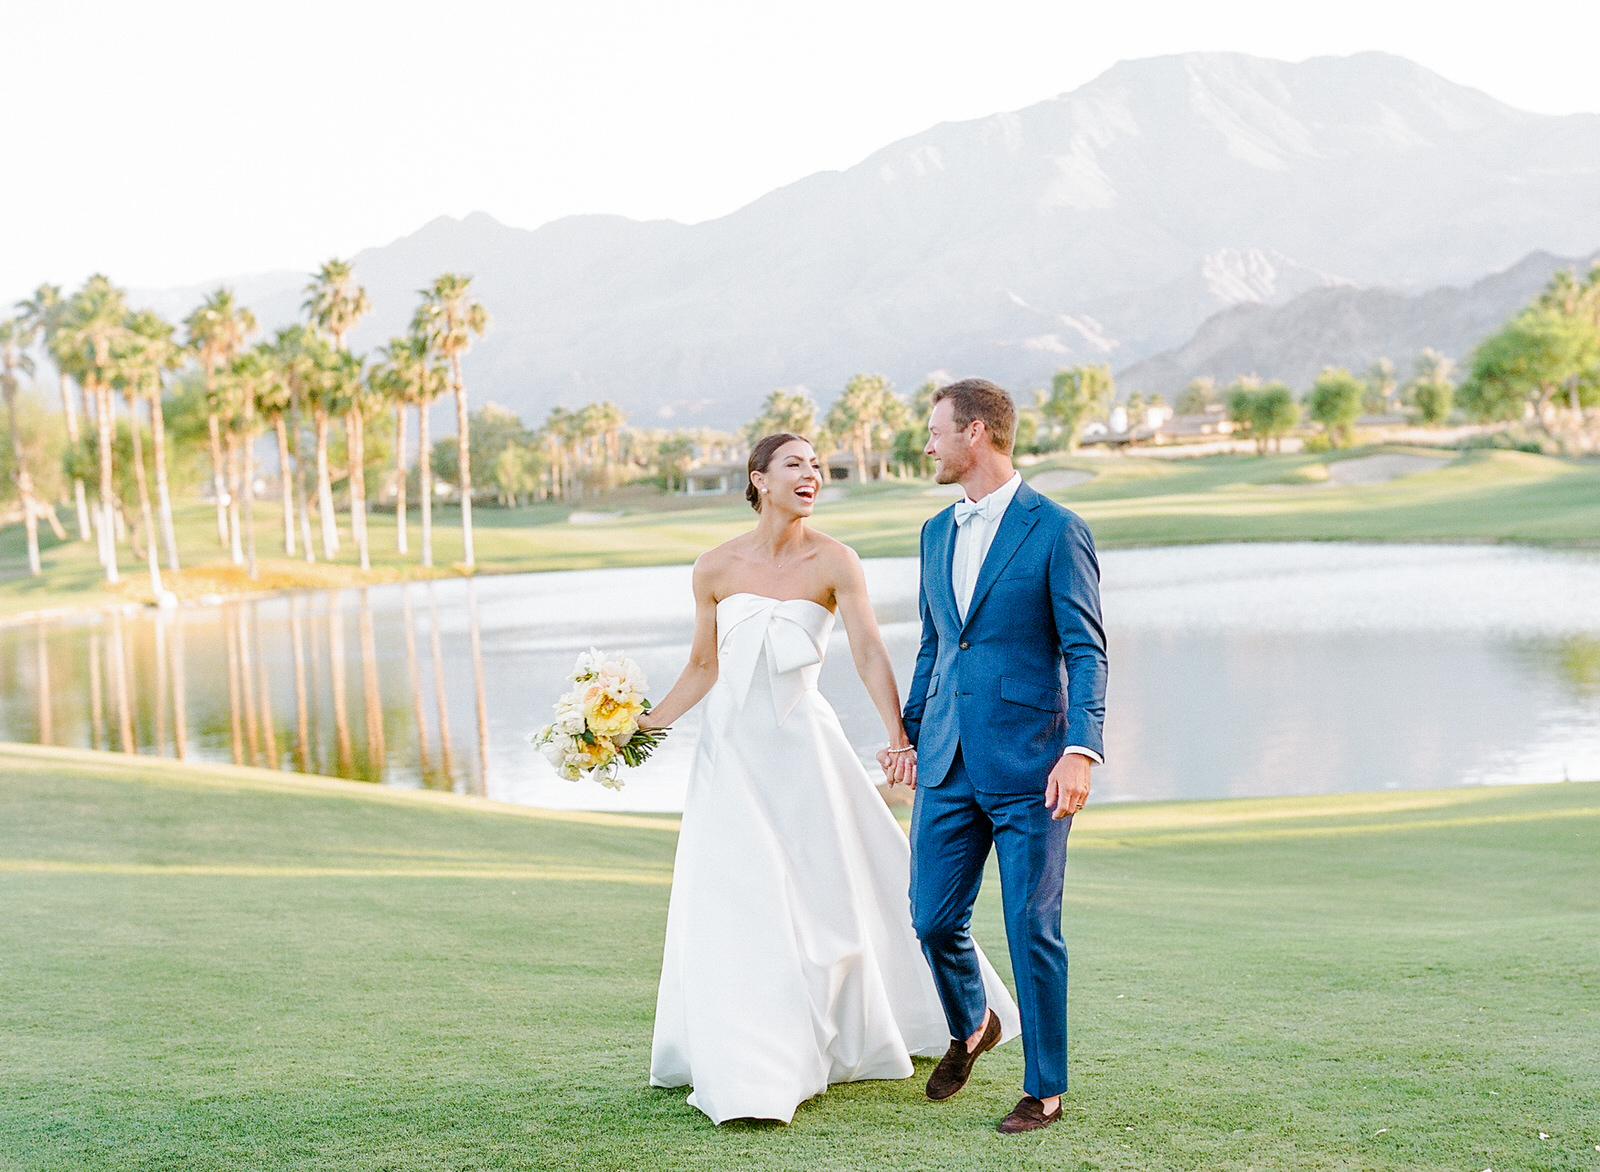 Not Even Tearing Her Lela Rose Dress in Half Could Bring Down This Bride's  Perfect Wedding Day - Over The Moon